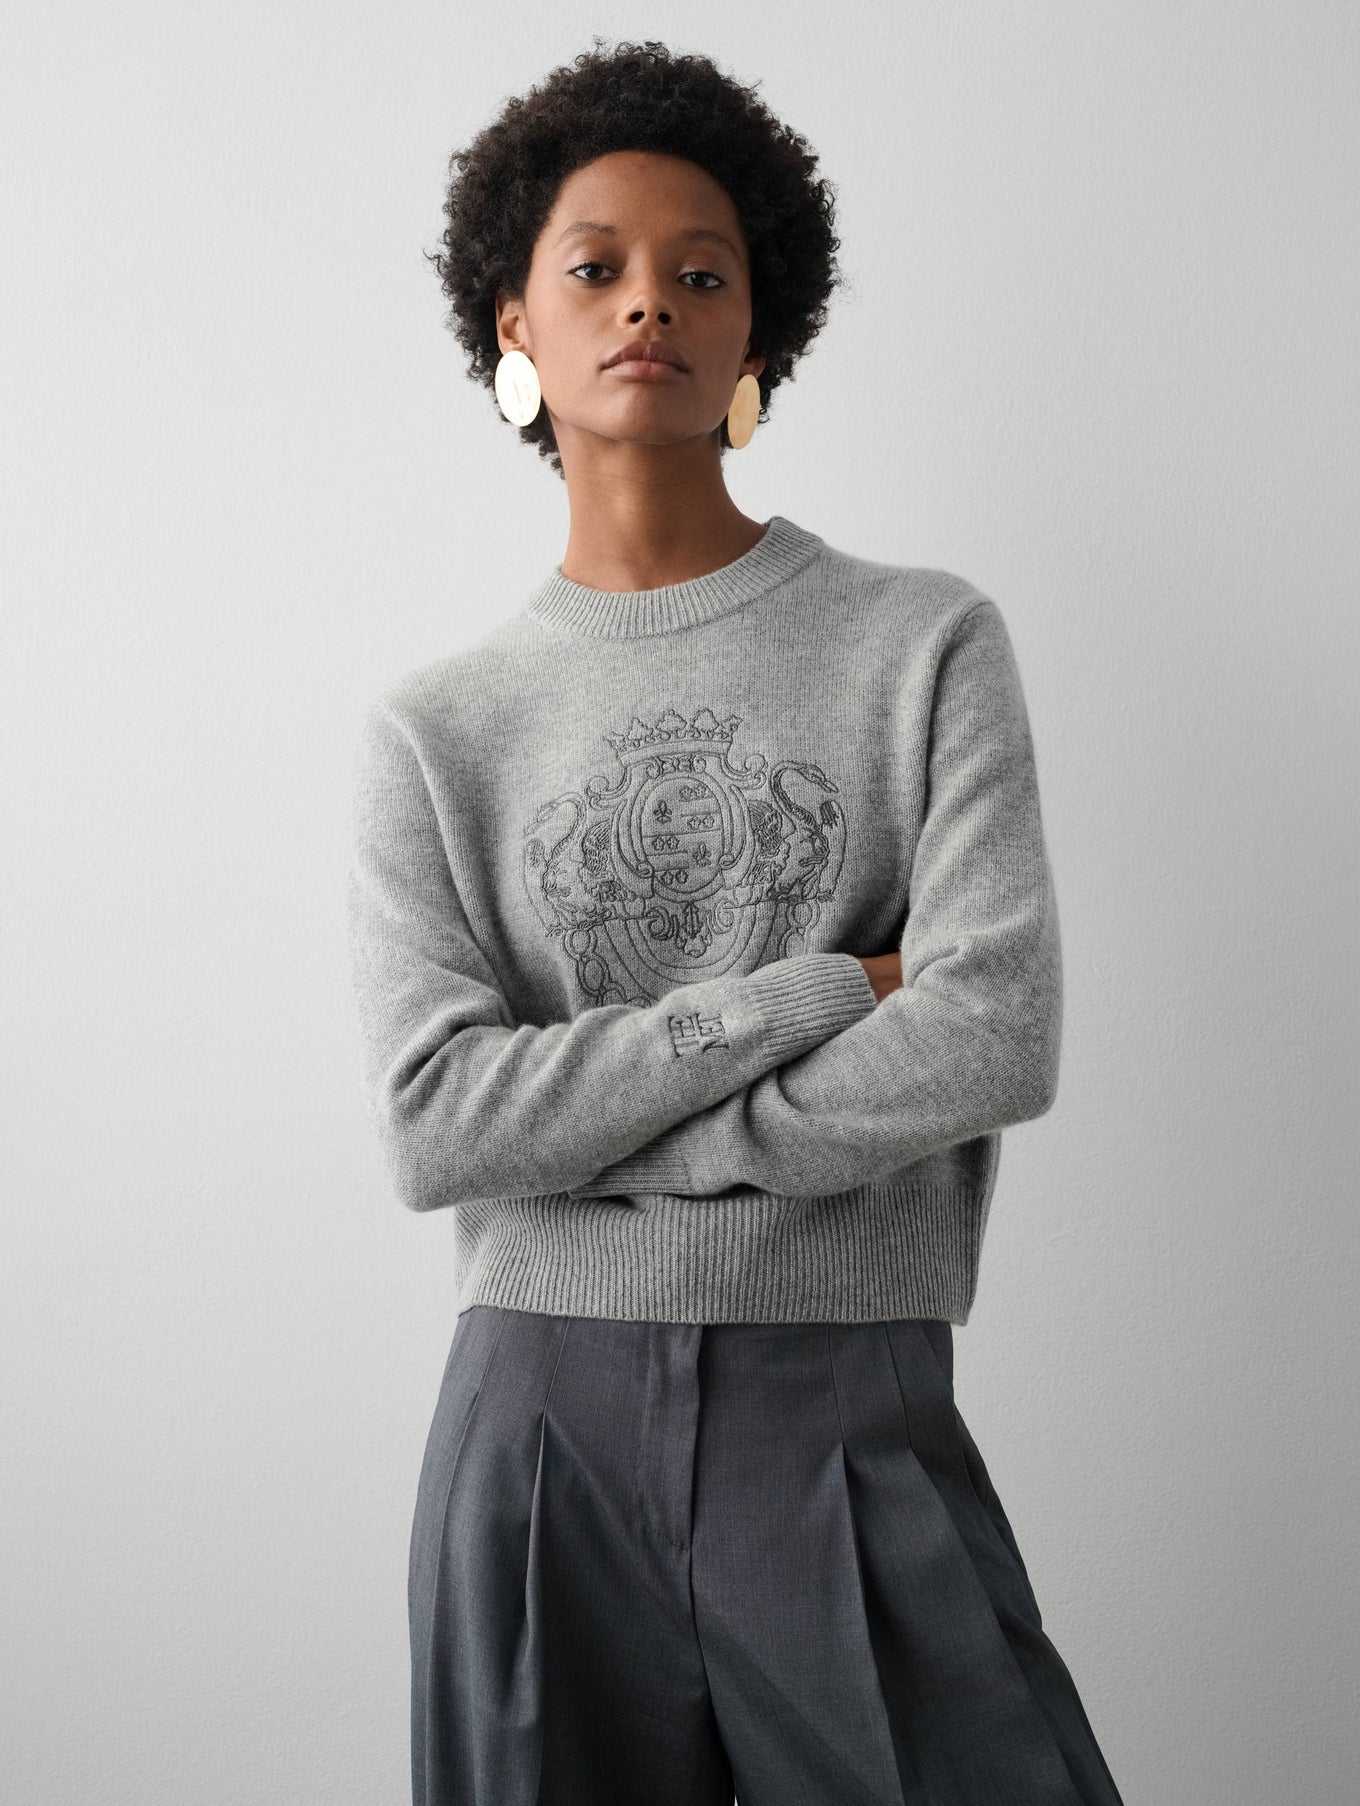 Cashmere Coat Of Arms Embroidered Crewneck